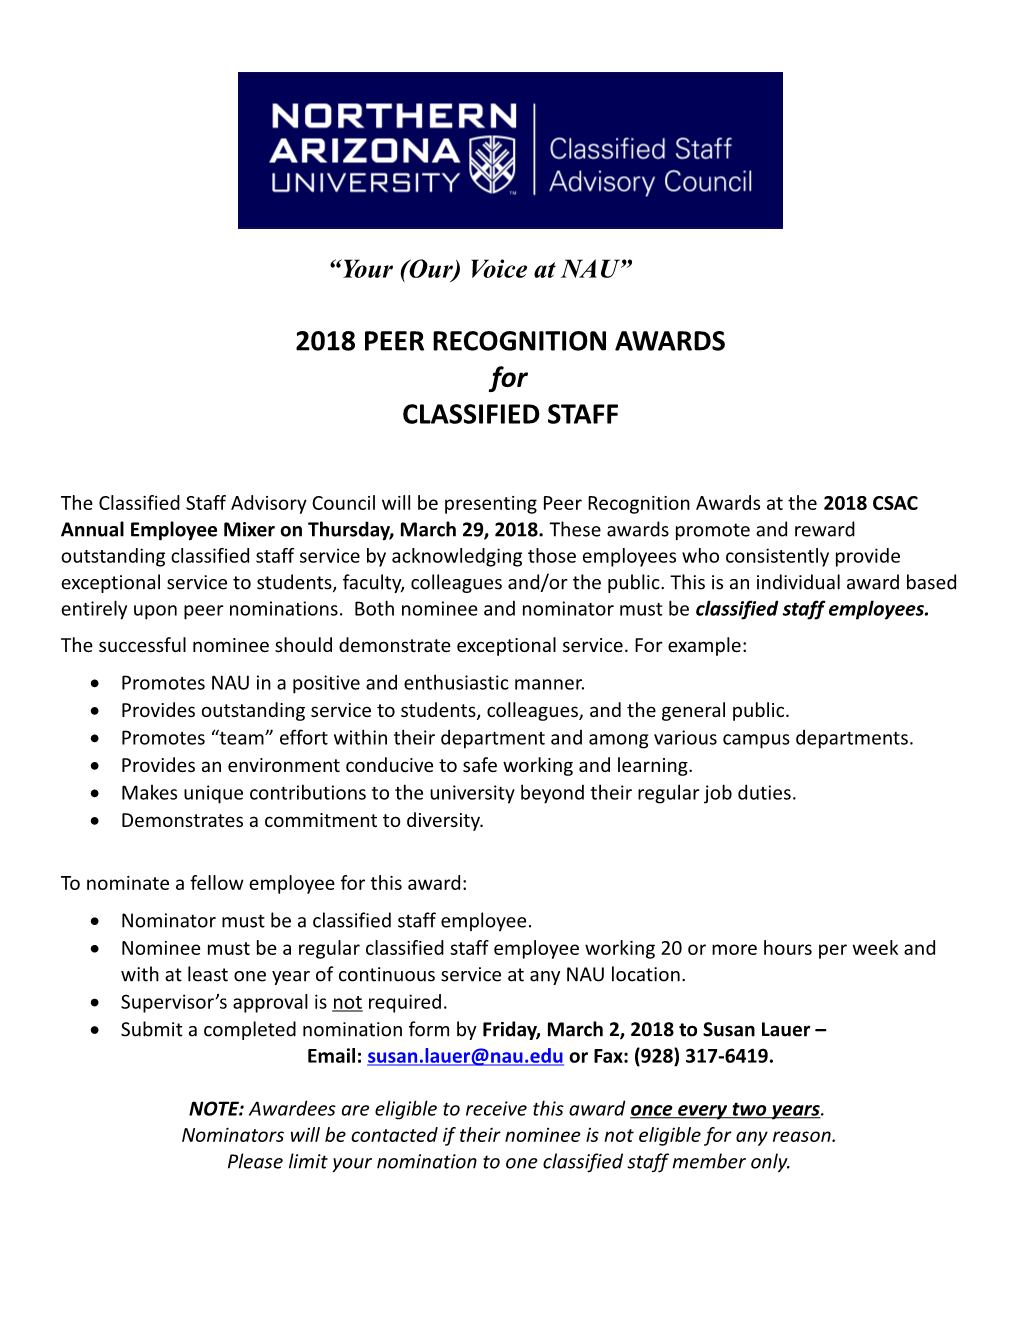 2018 Peer Recognition Awards